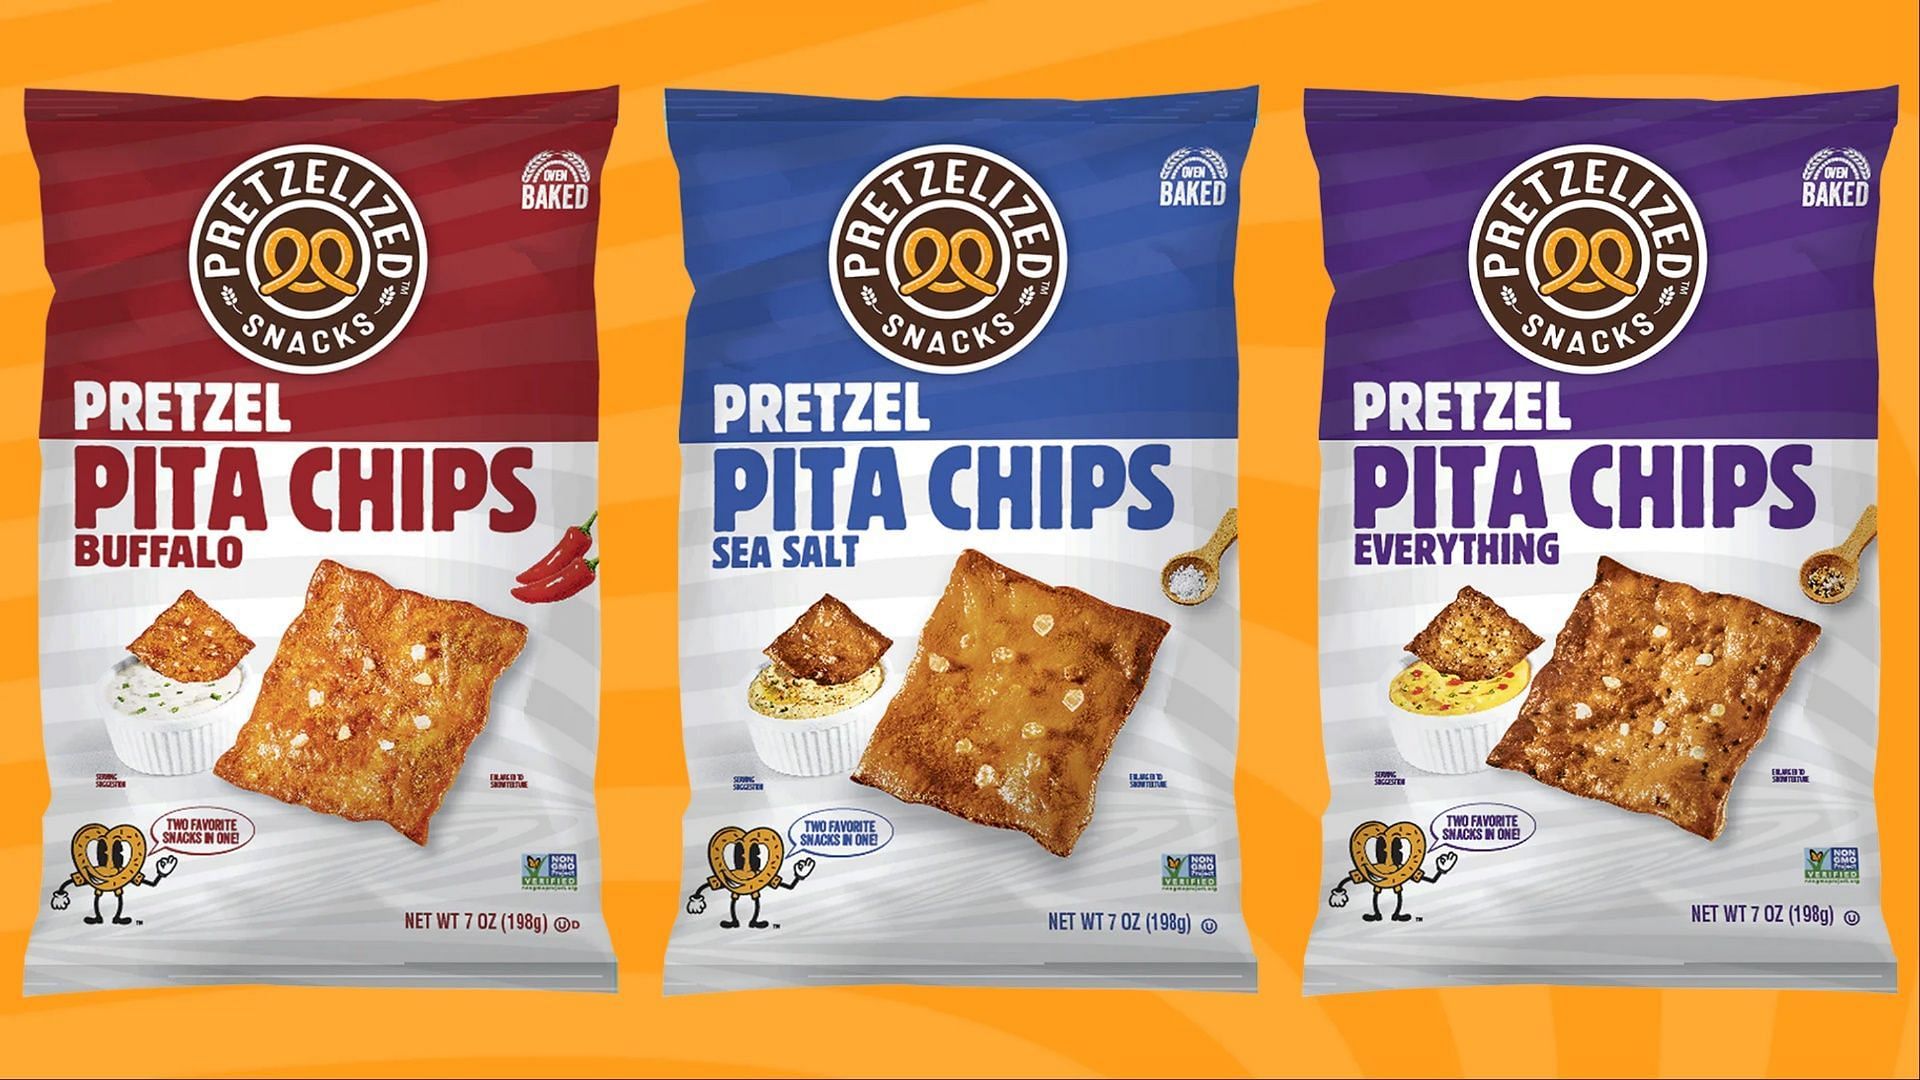 The Pretzel Pita Chips and Pretzel Crackers products are available nationwide starting April 2 (Image via Pretzelized)